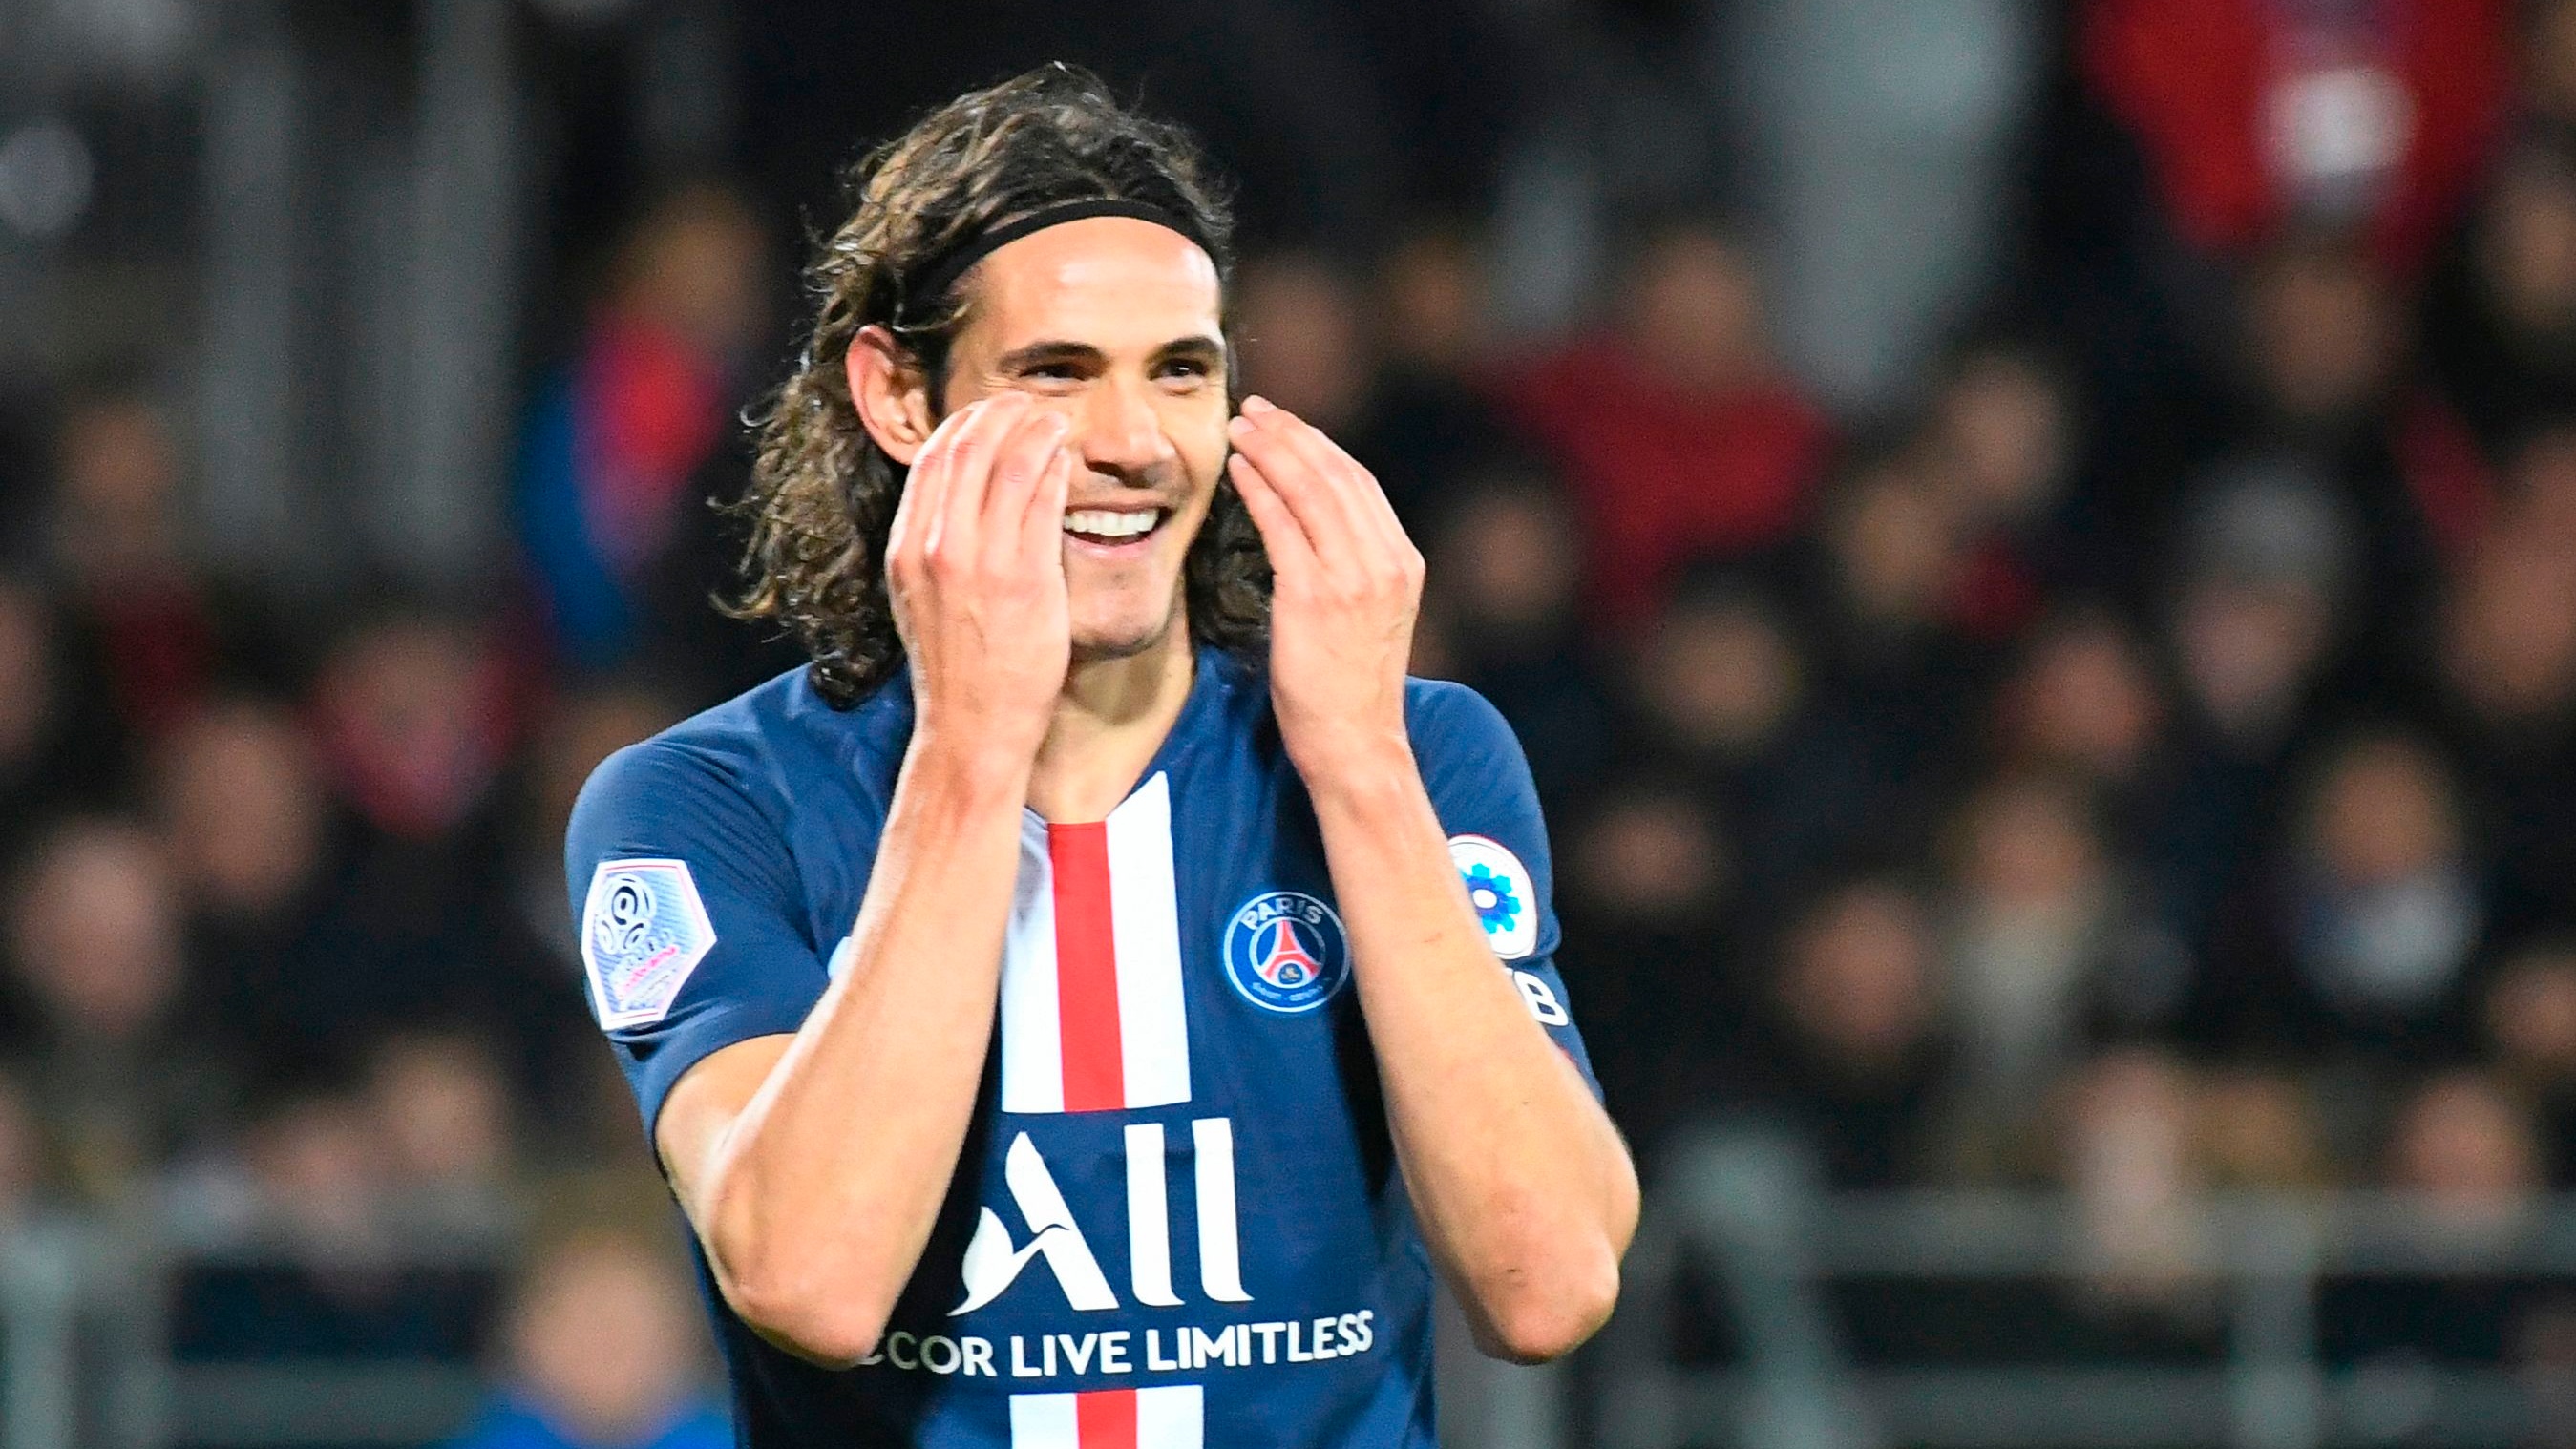 Cavani & Meunier to leave PSG in June as duo decide against extension for Champions League